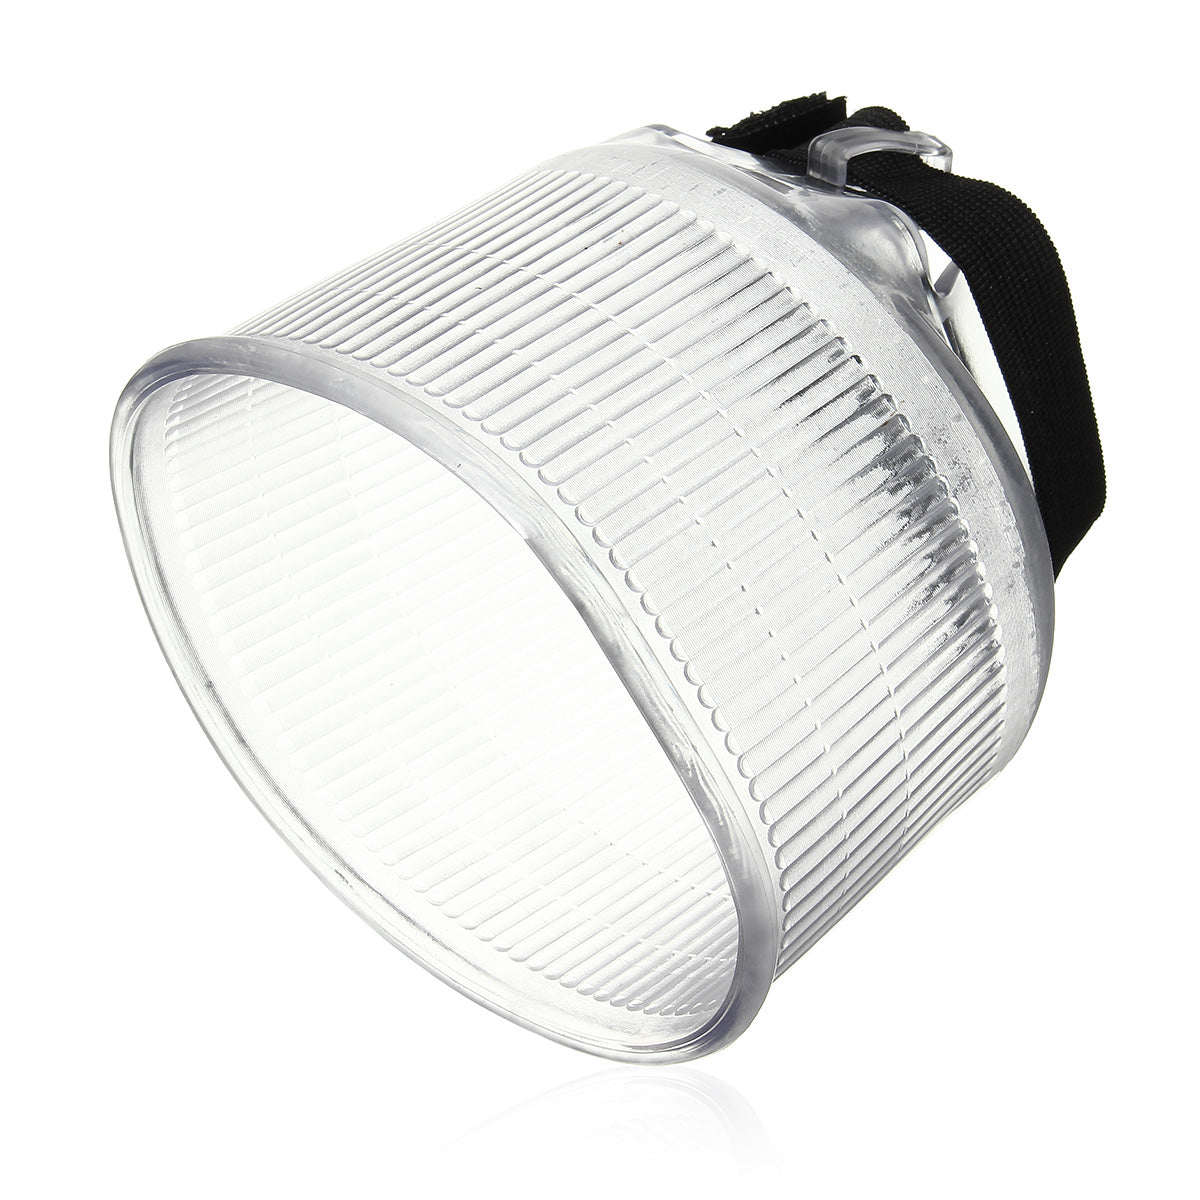 Universal Cloud Lambency Flash Diffuser Reflector White ABS with Dome Cover Sets